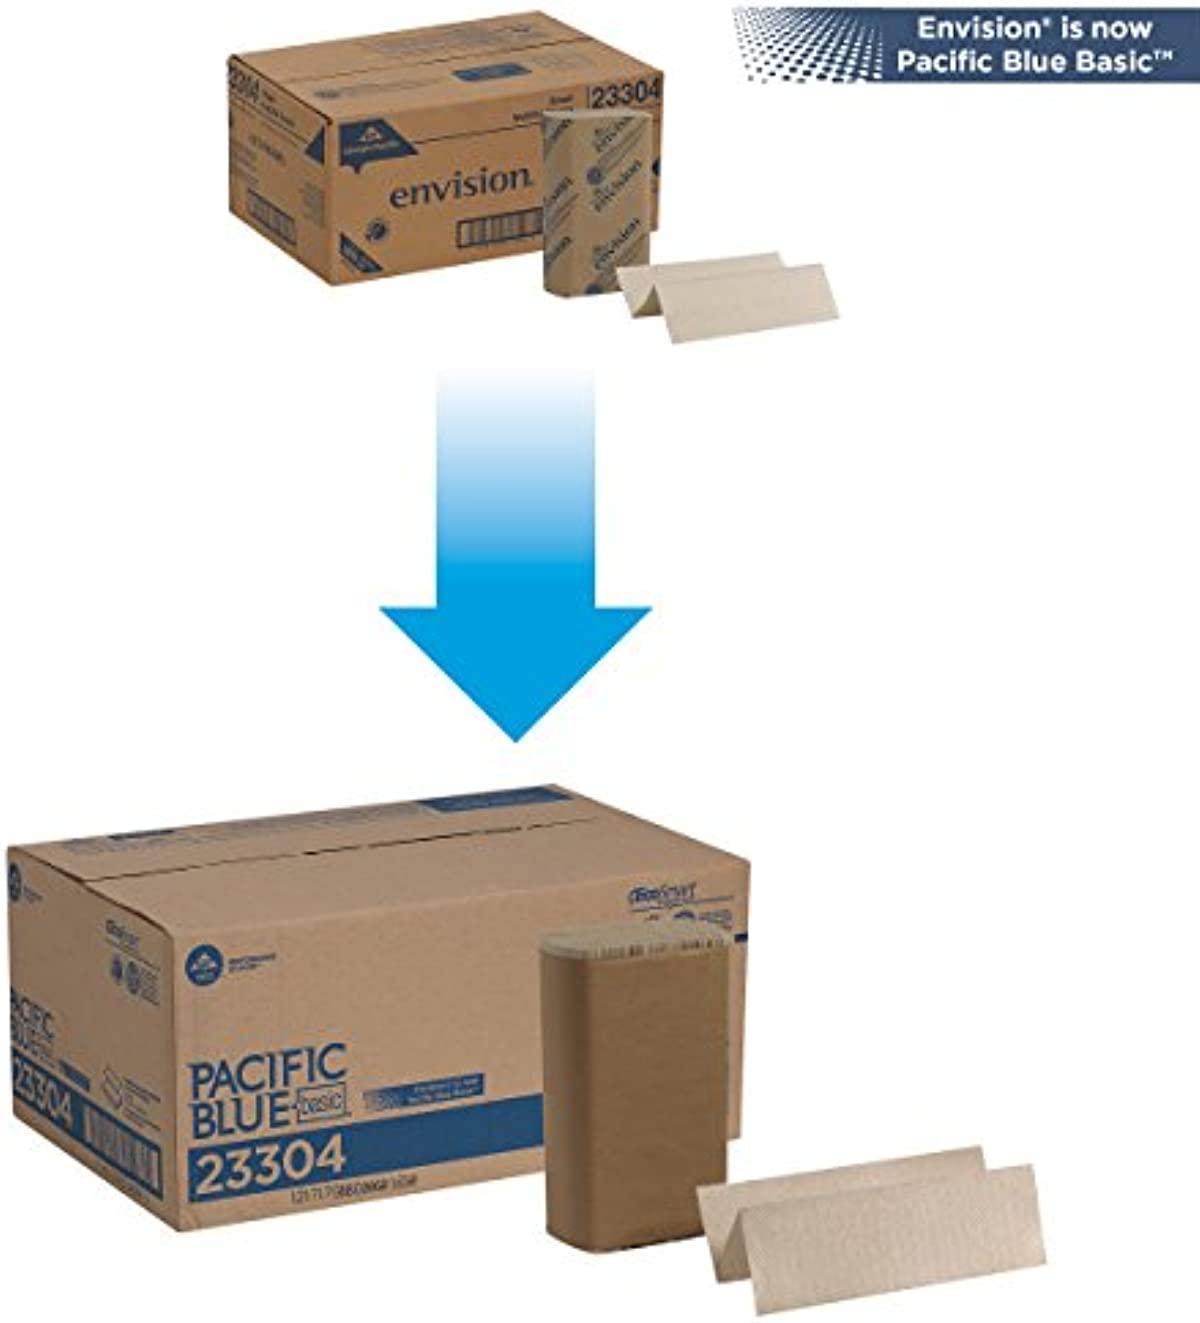 Pacific Blue Basic Recycled Multifold Paper Towels (Previously Branded Envision) by GP PRO (Georgia-Pacific), Brown, 23304, 250 Towels Per Pack, 16 Packs Per Case